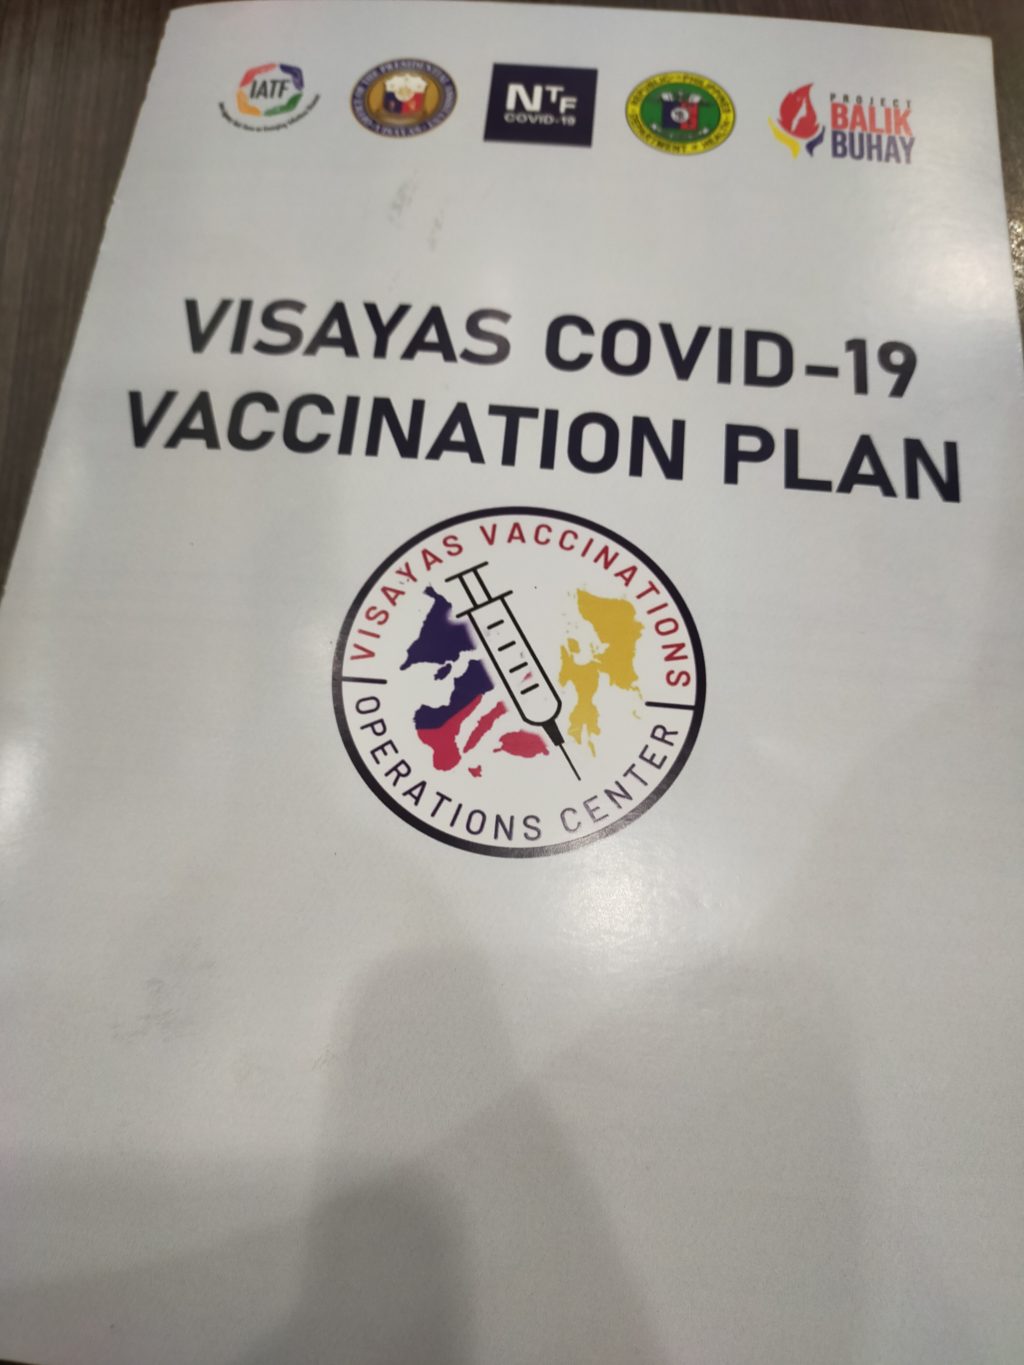 vaccination plan for the Visayas